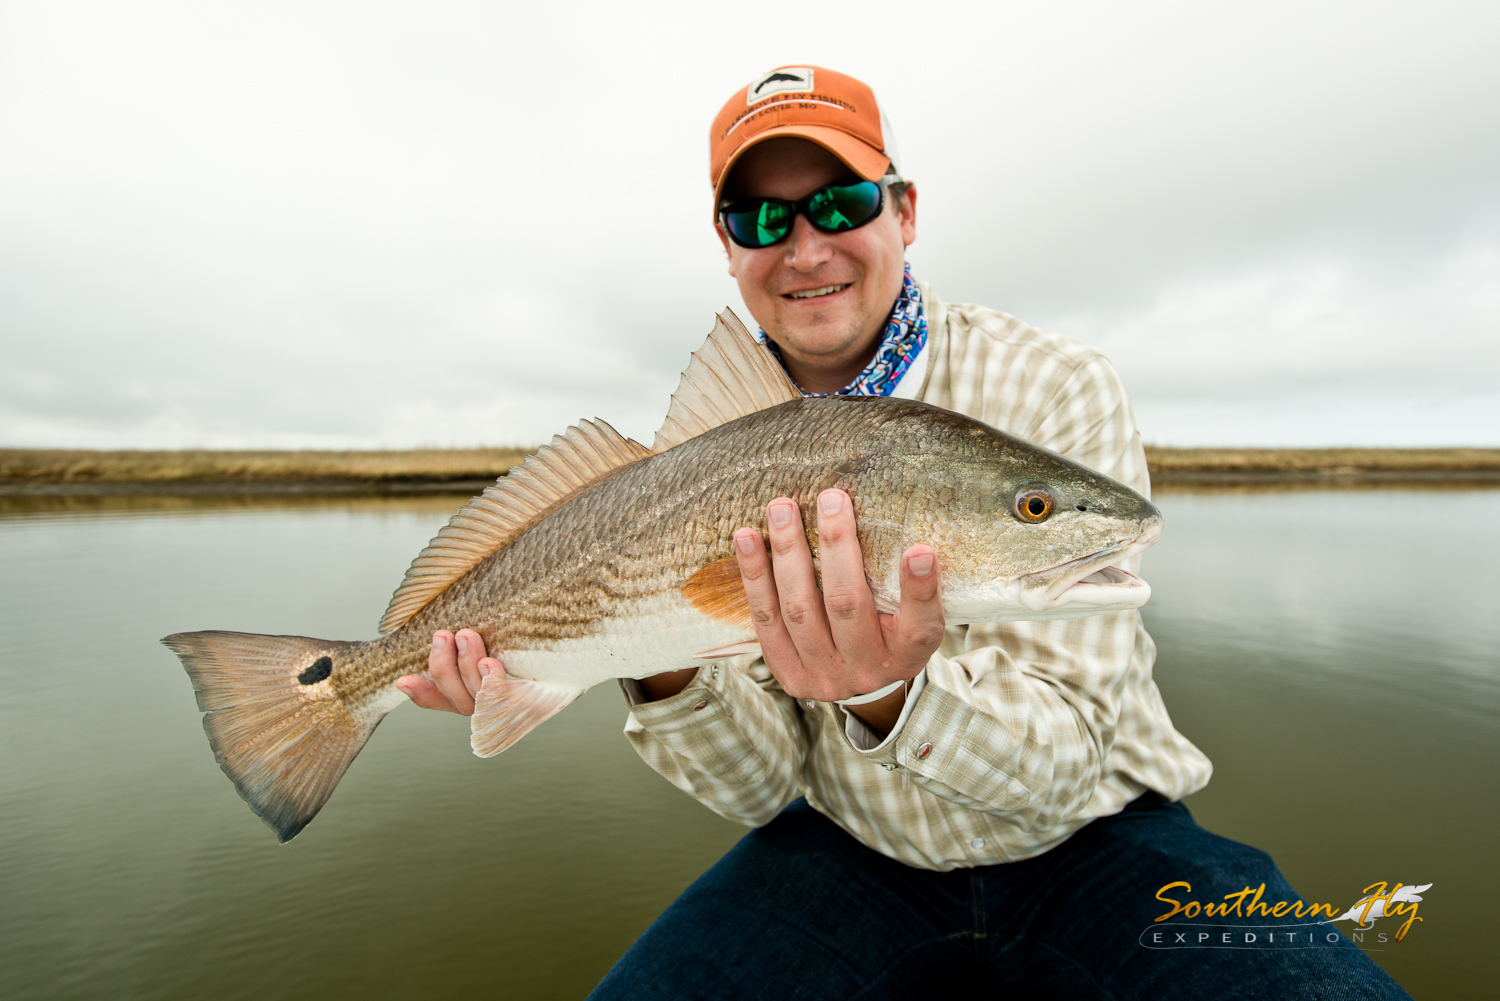 2016-12-28_SouthernFlyExpeditions_ChrisAndPaulConant-2.jpg